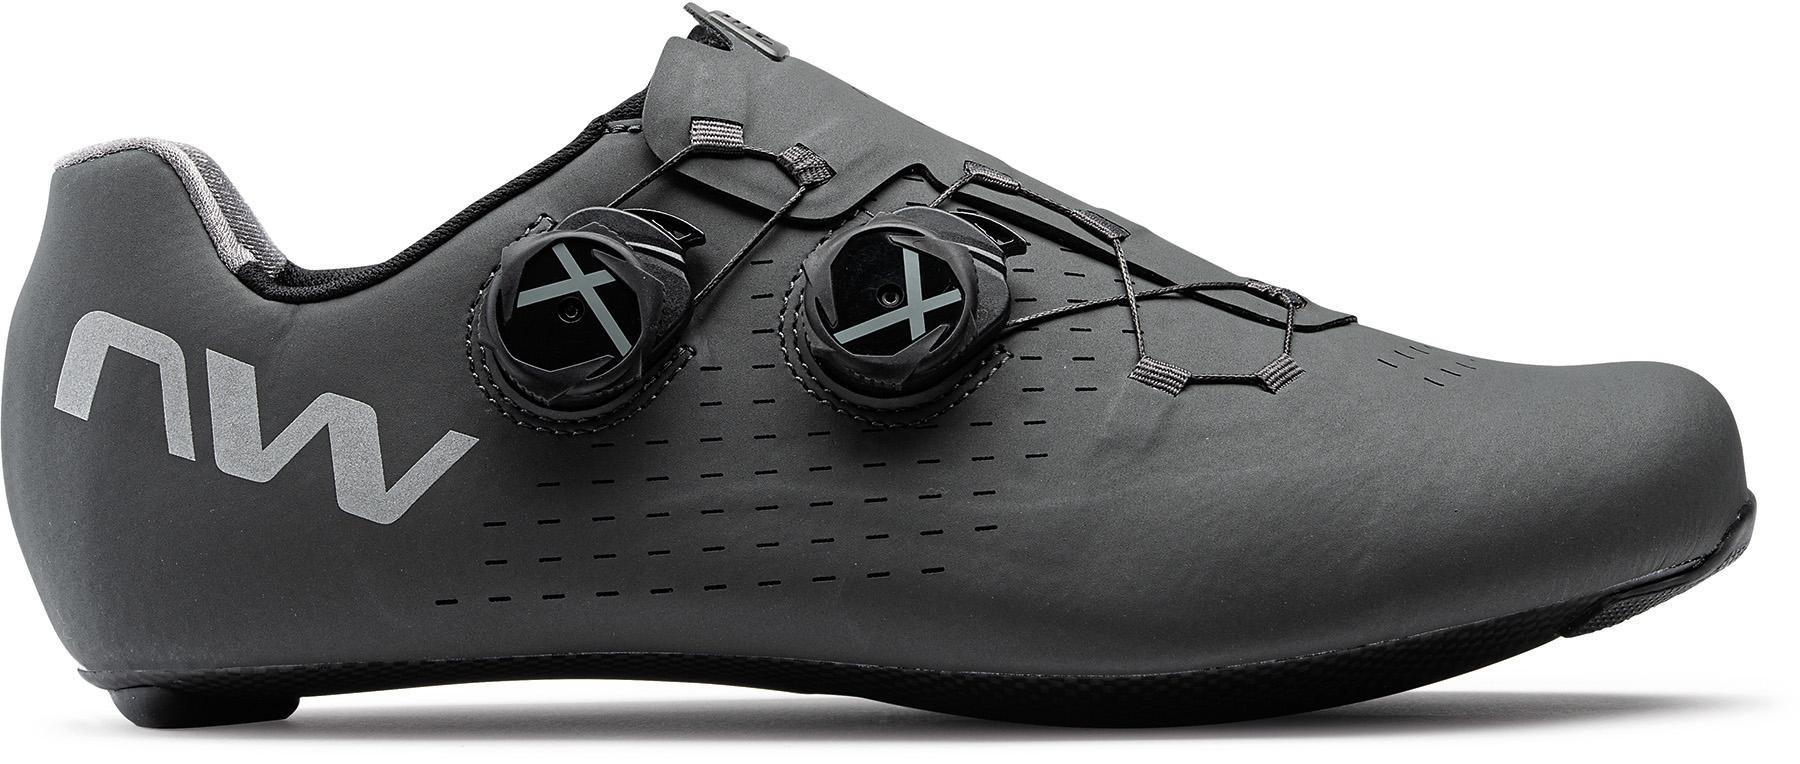 Northwave Extreme Pro 2 Road Shoes - Anthracite